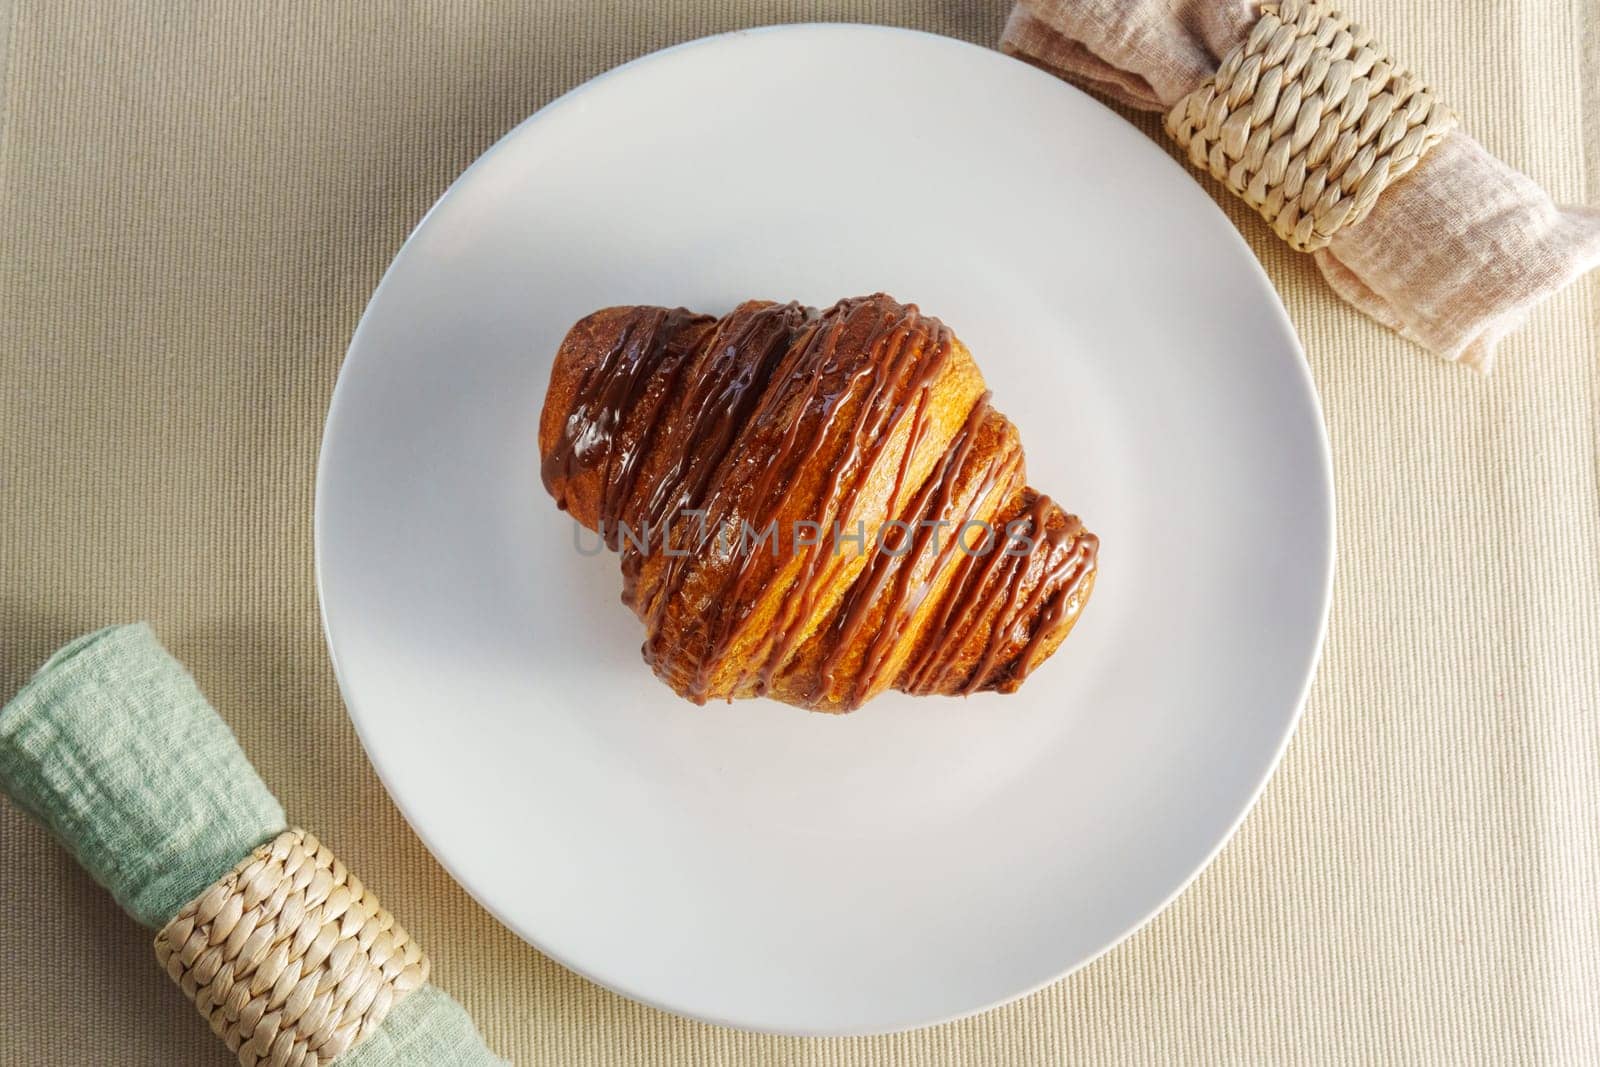 Croissant delicately placed on a pristine white plate, showcasing its buttery layers and inviting aroma. by darksoul72